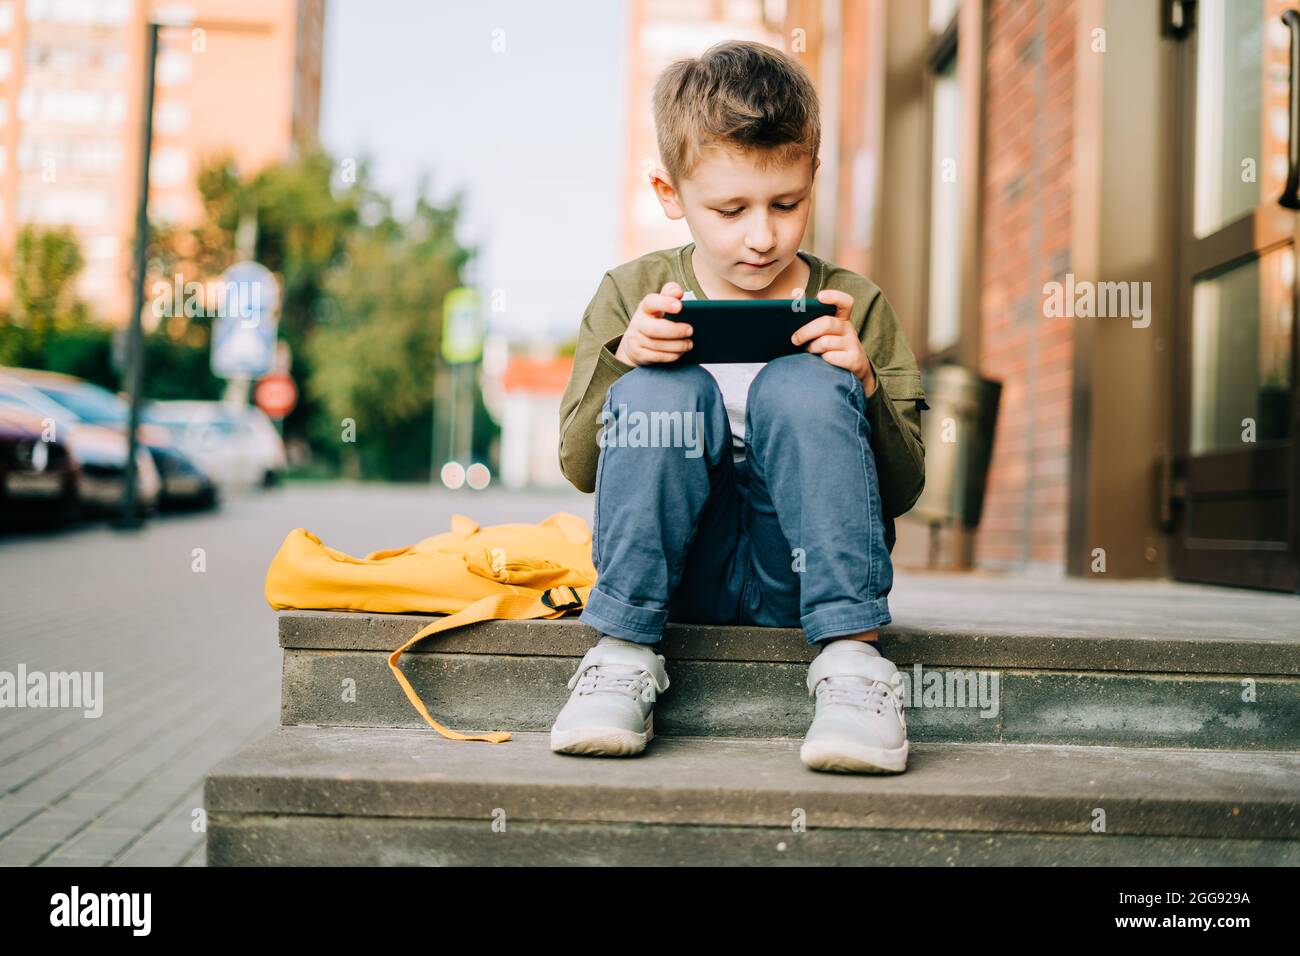 Back to school. Cute child with backpack, holding mobile phone, playing with cellphone. School boy pupil with bag. Elementary school student after Stock Photo